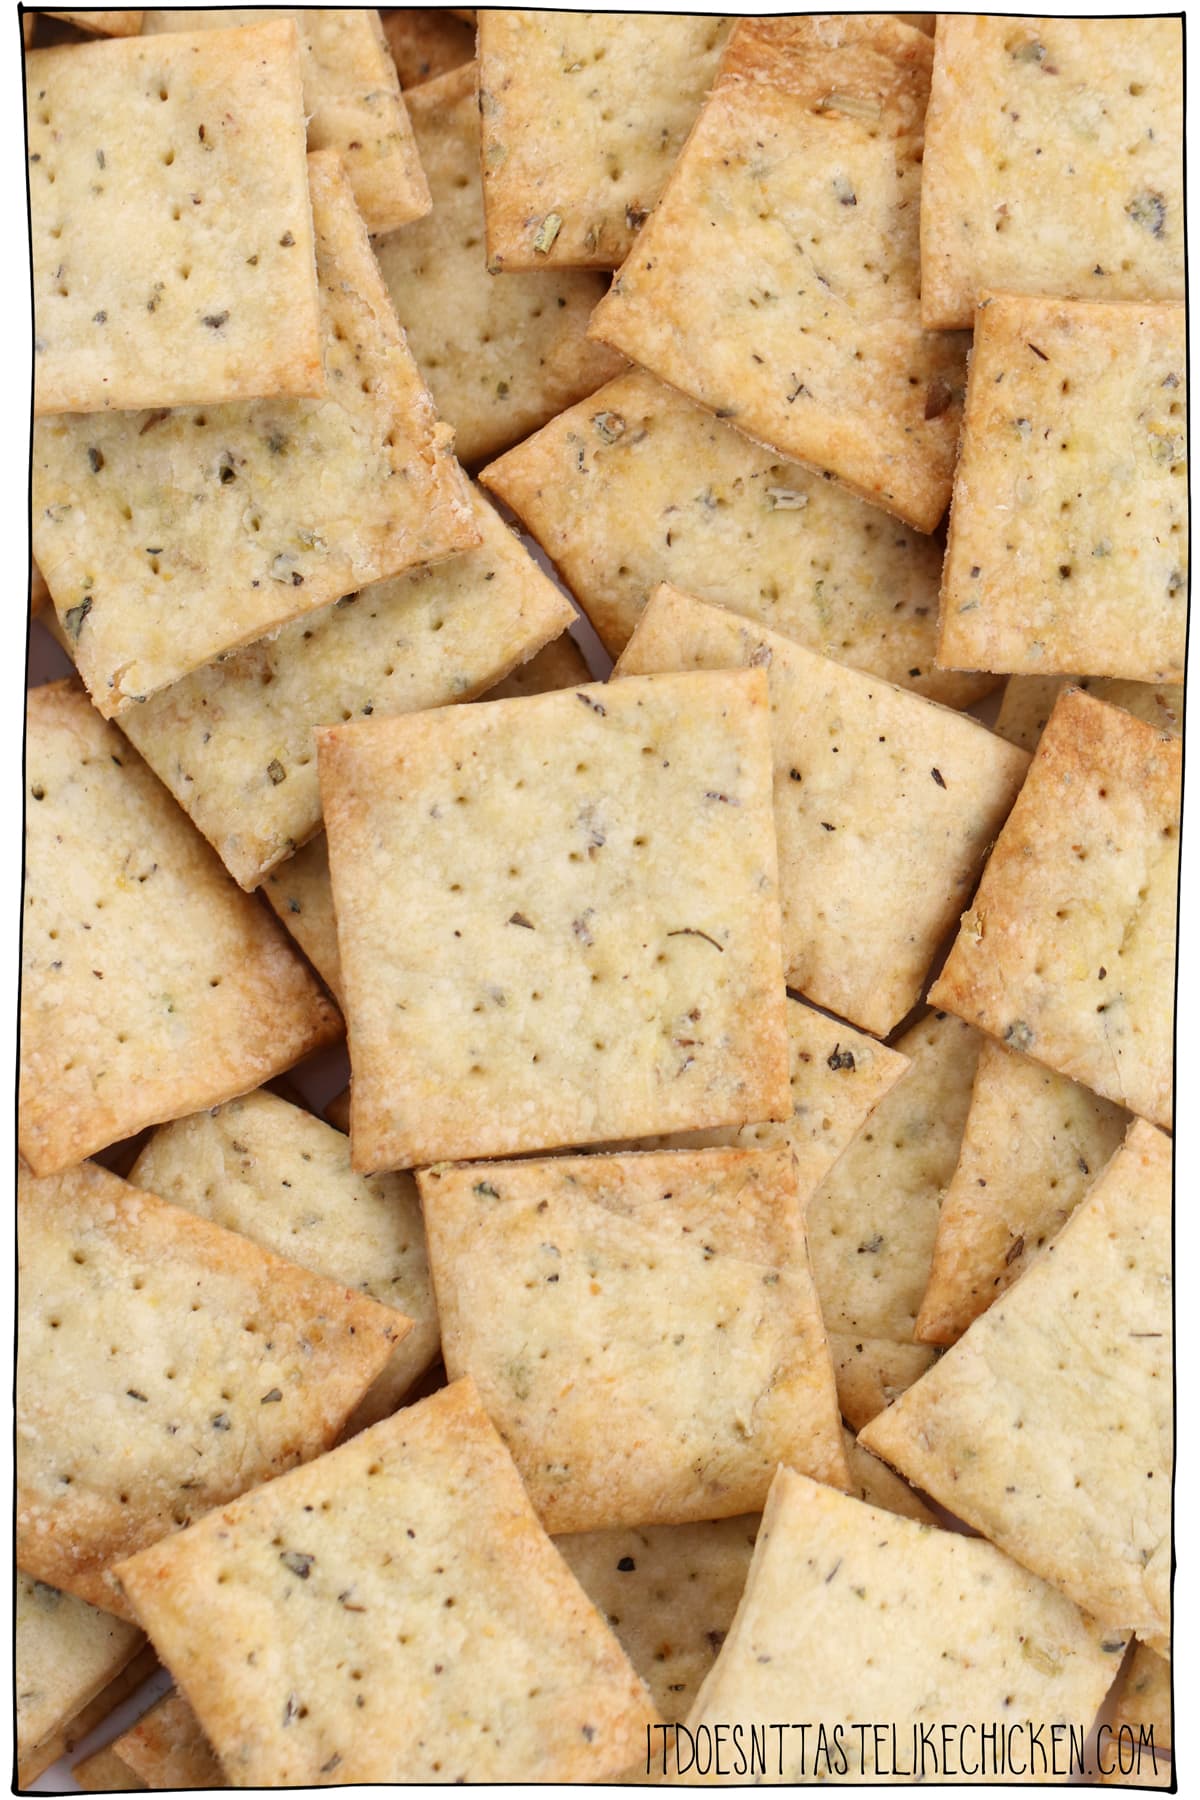 Easy Crispy Vegan Crackers! Just 9 ingredients to make these super crunchy crackers. Perfect for serving with your favourite vegan cheese, hummus, or any dip, or enjoy as a snack all on their own. #itdoesnttastelikechicken #veganrecipes #vegansnack